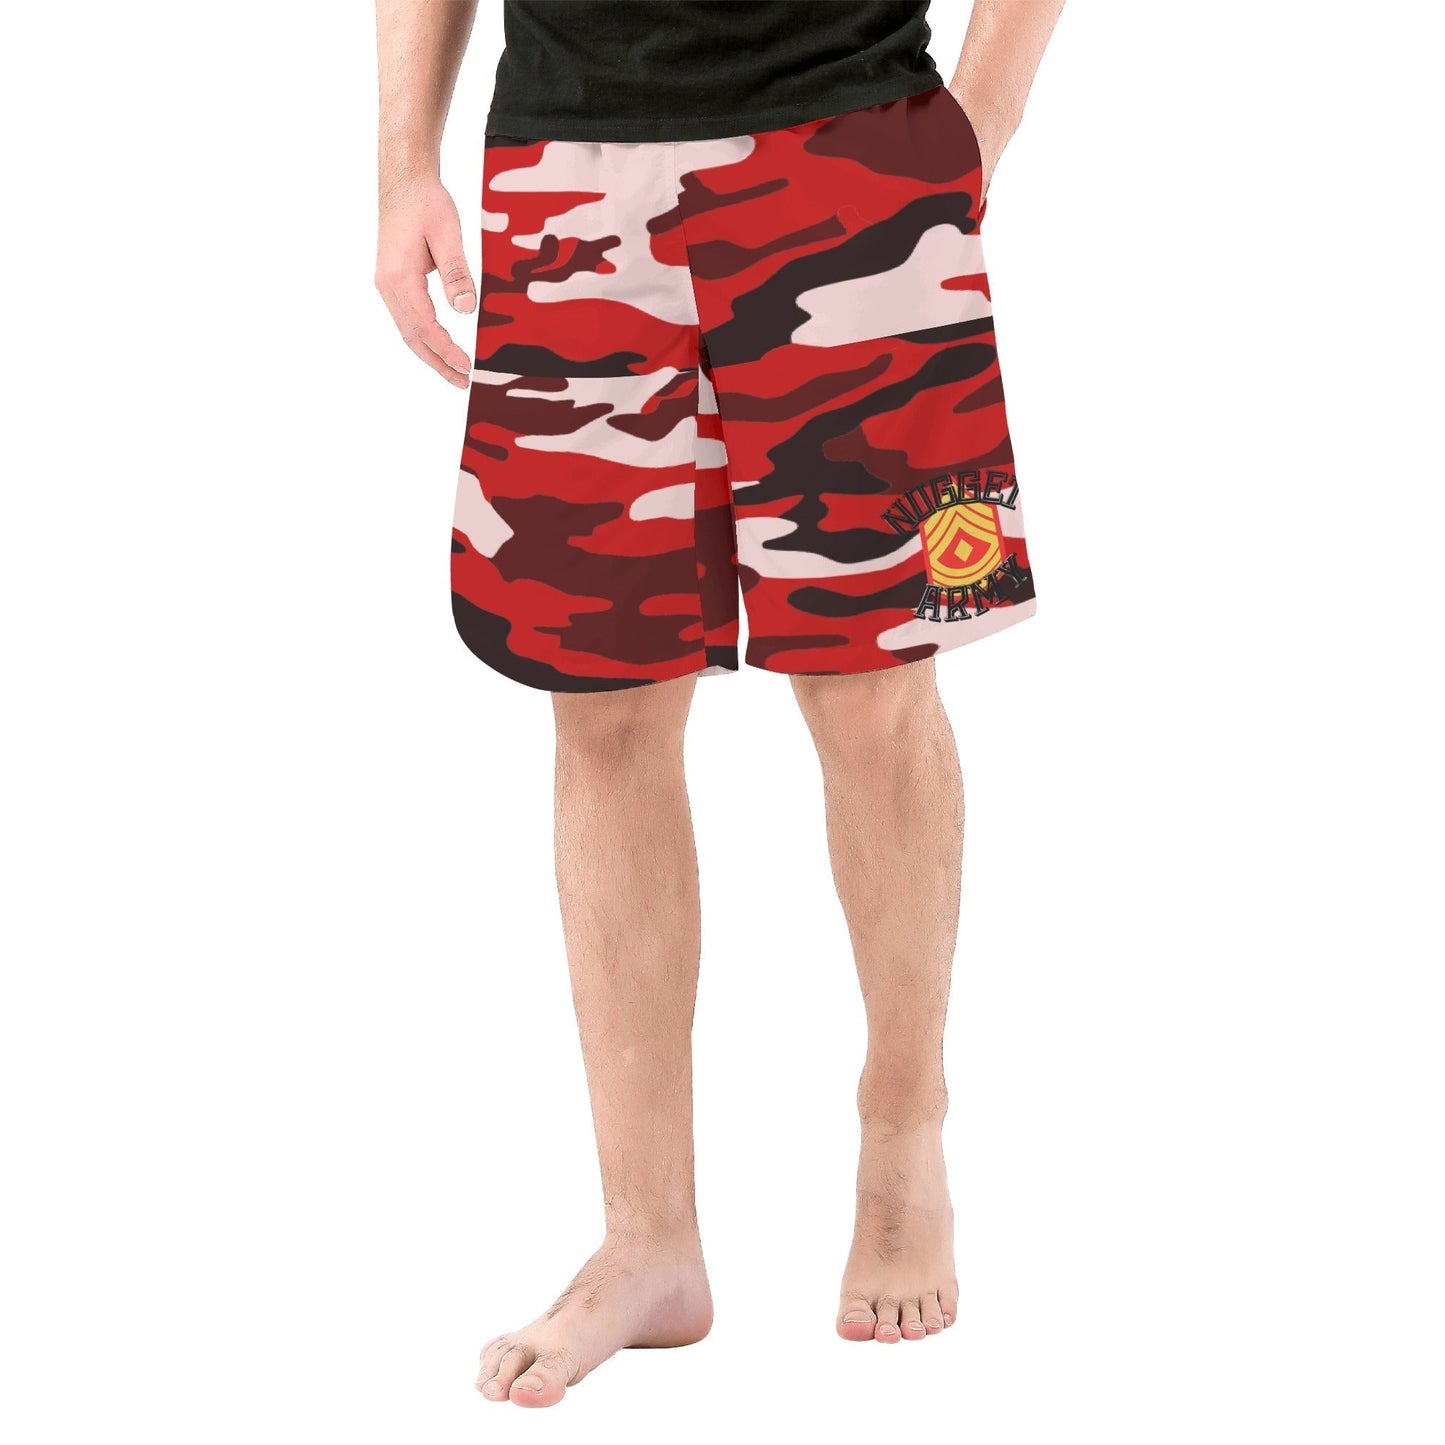 Stand out  with the  Nugget Army Mens Board Shorts  available at Hey Nugget. Grab yours today!